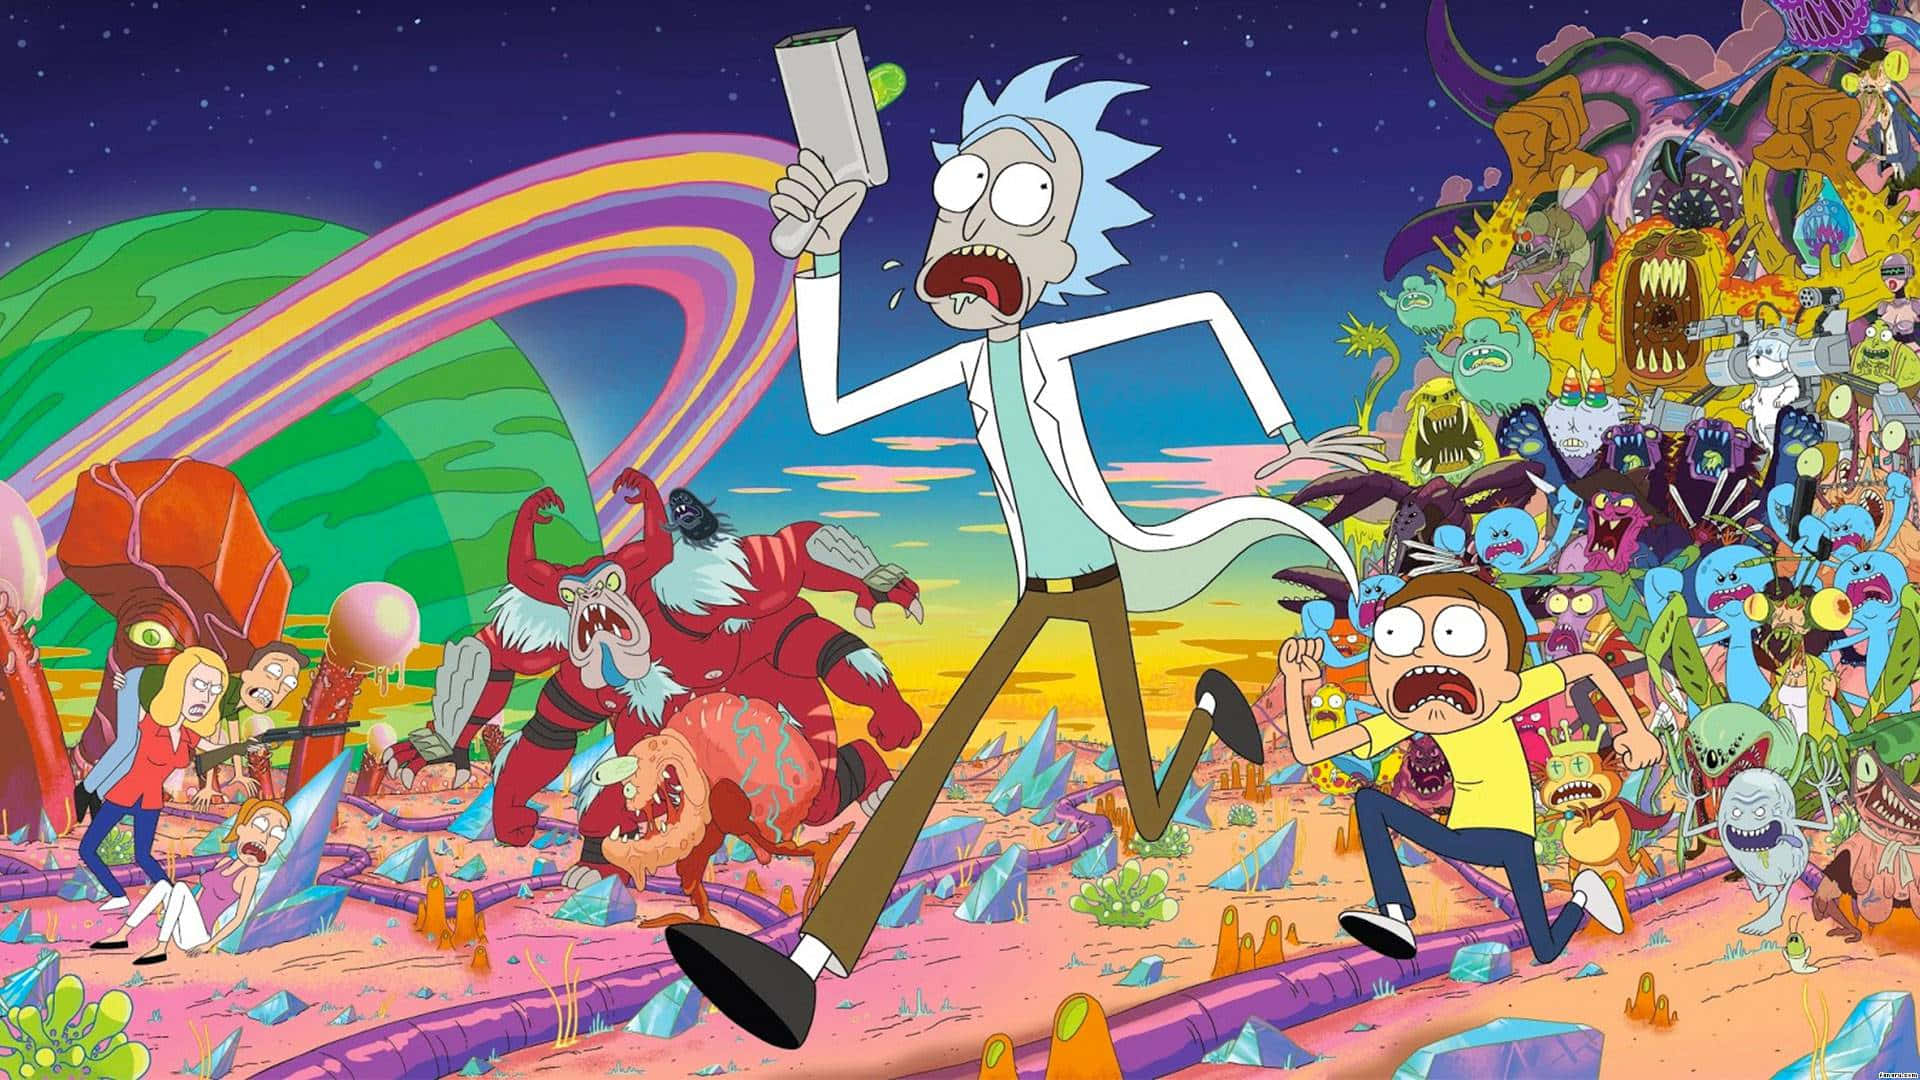 Express your love for Rick and Morty with this exclusive Macbook design! Wallpaper